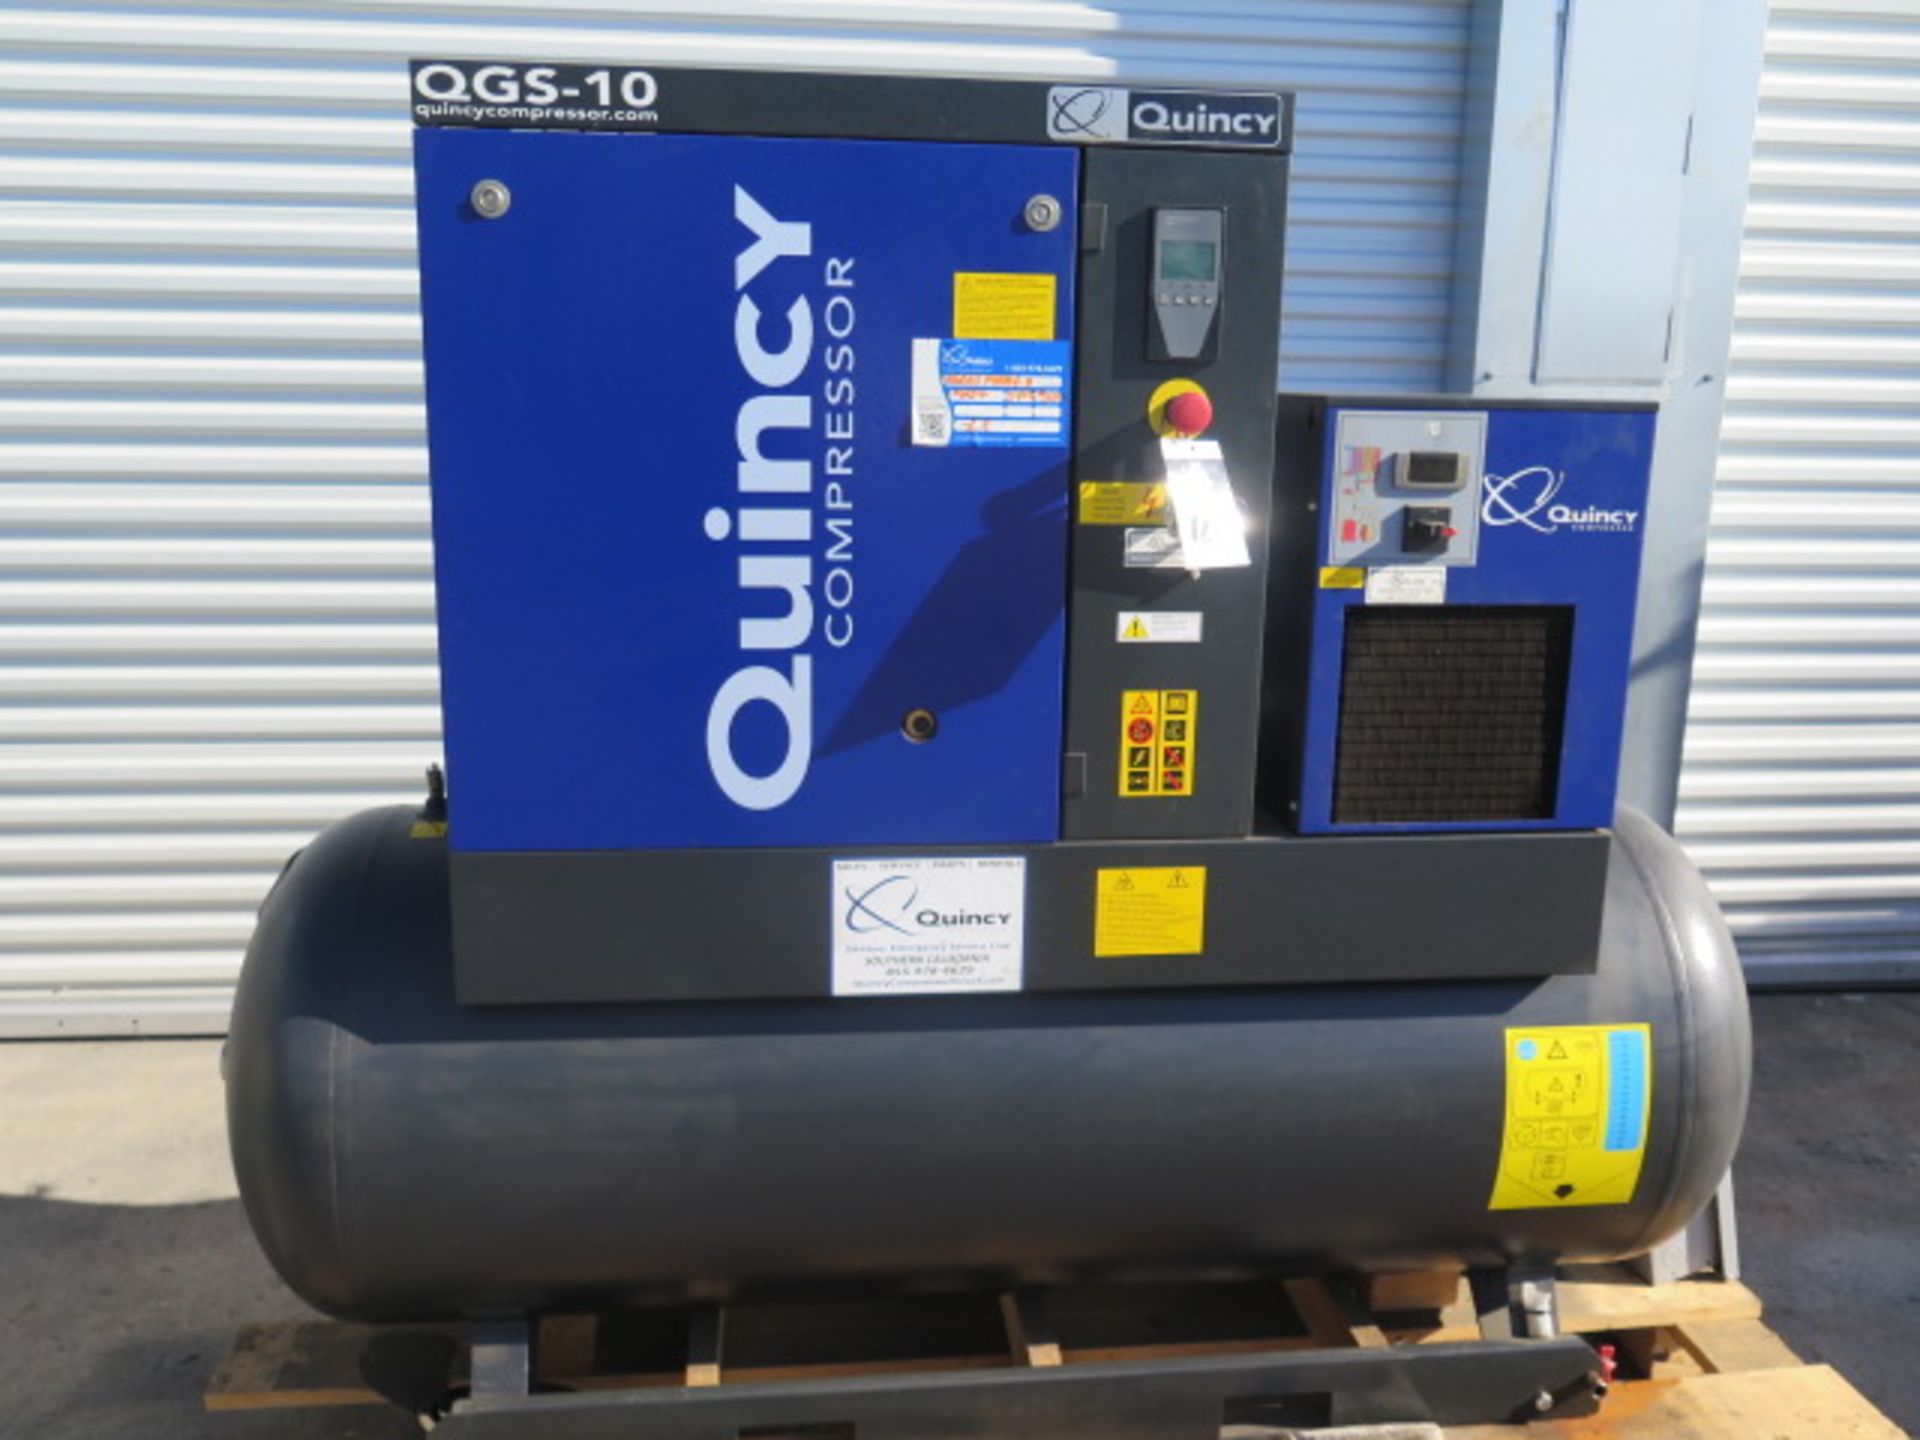 2019 Quincy QGS-10 DT120 10Hp Rotary Air Comp s/n ITJ234684 w/ Dig Controls, Low Hours, SOLD AS IS